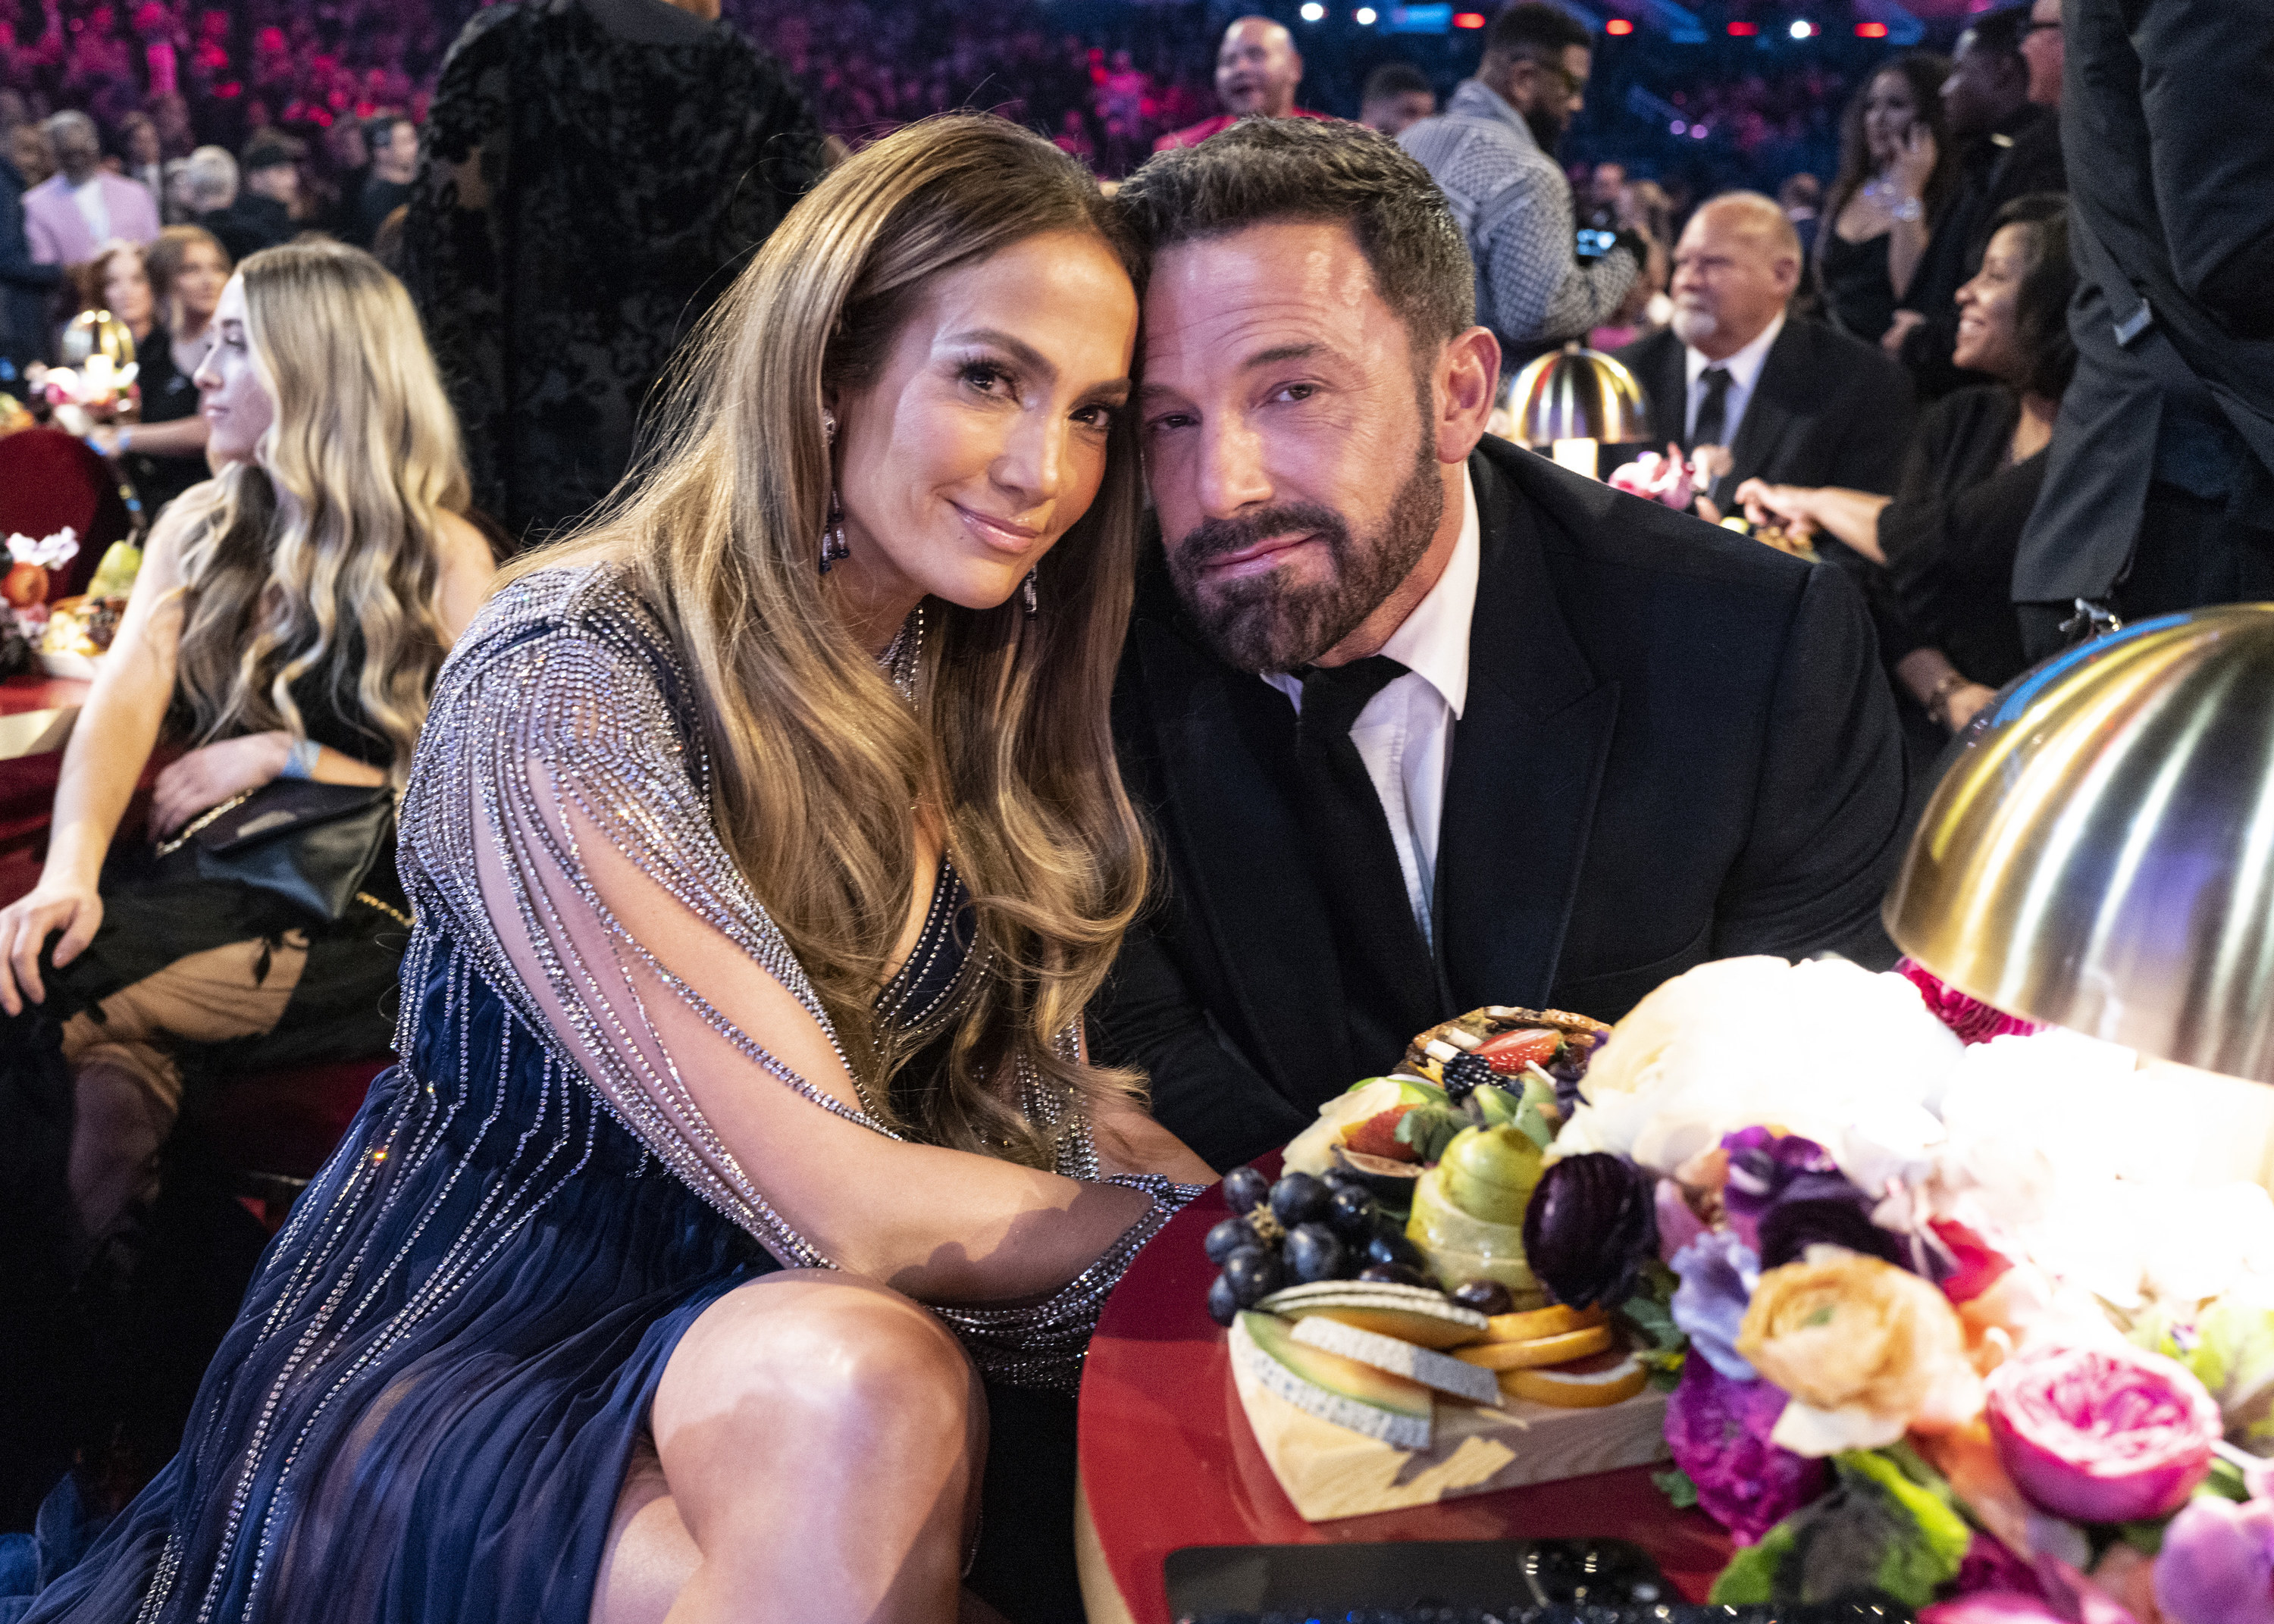 JLo and Ben snuggling at a table